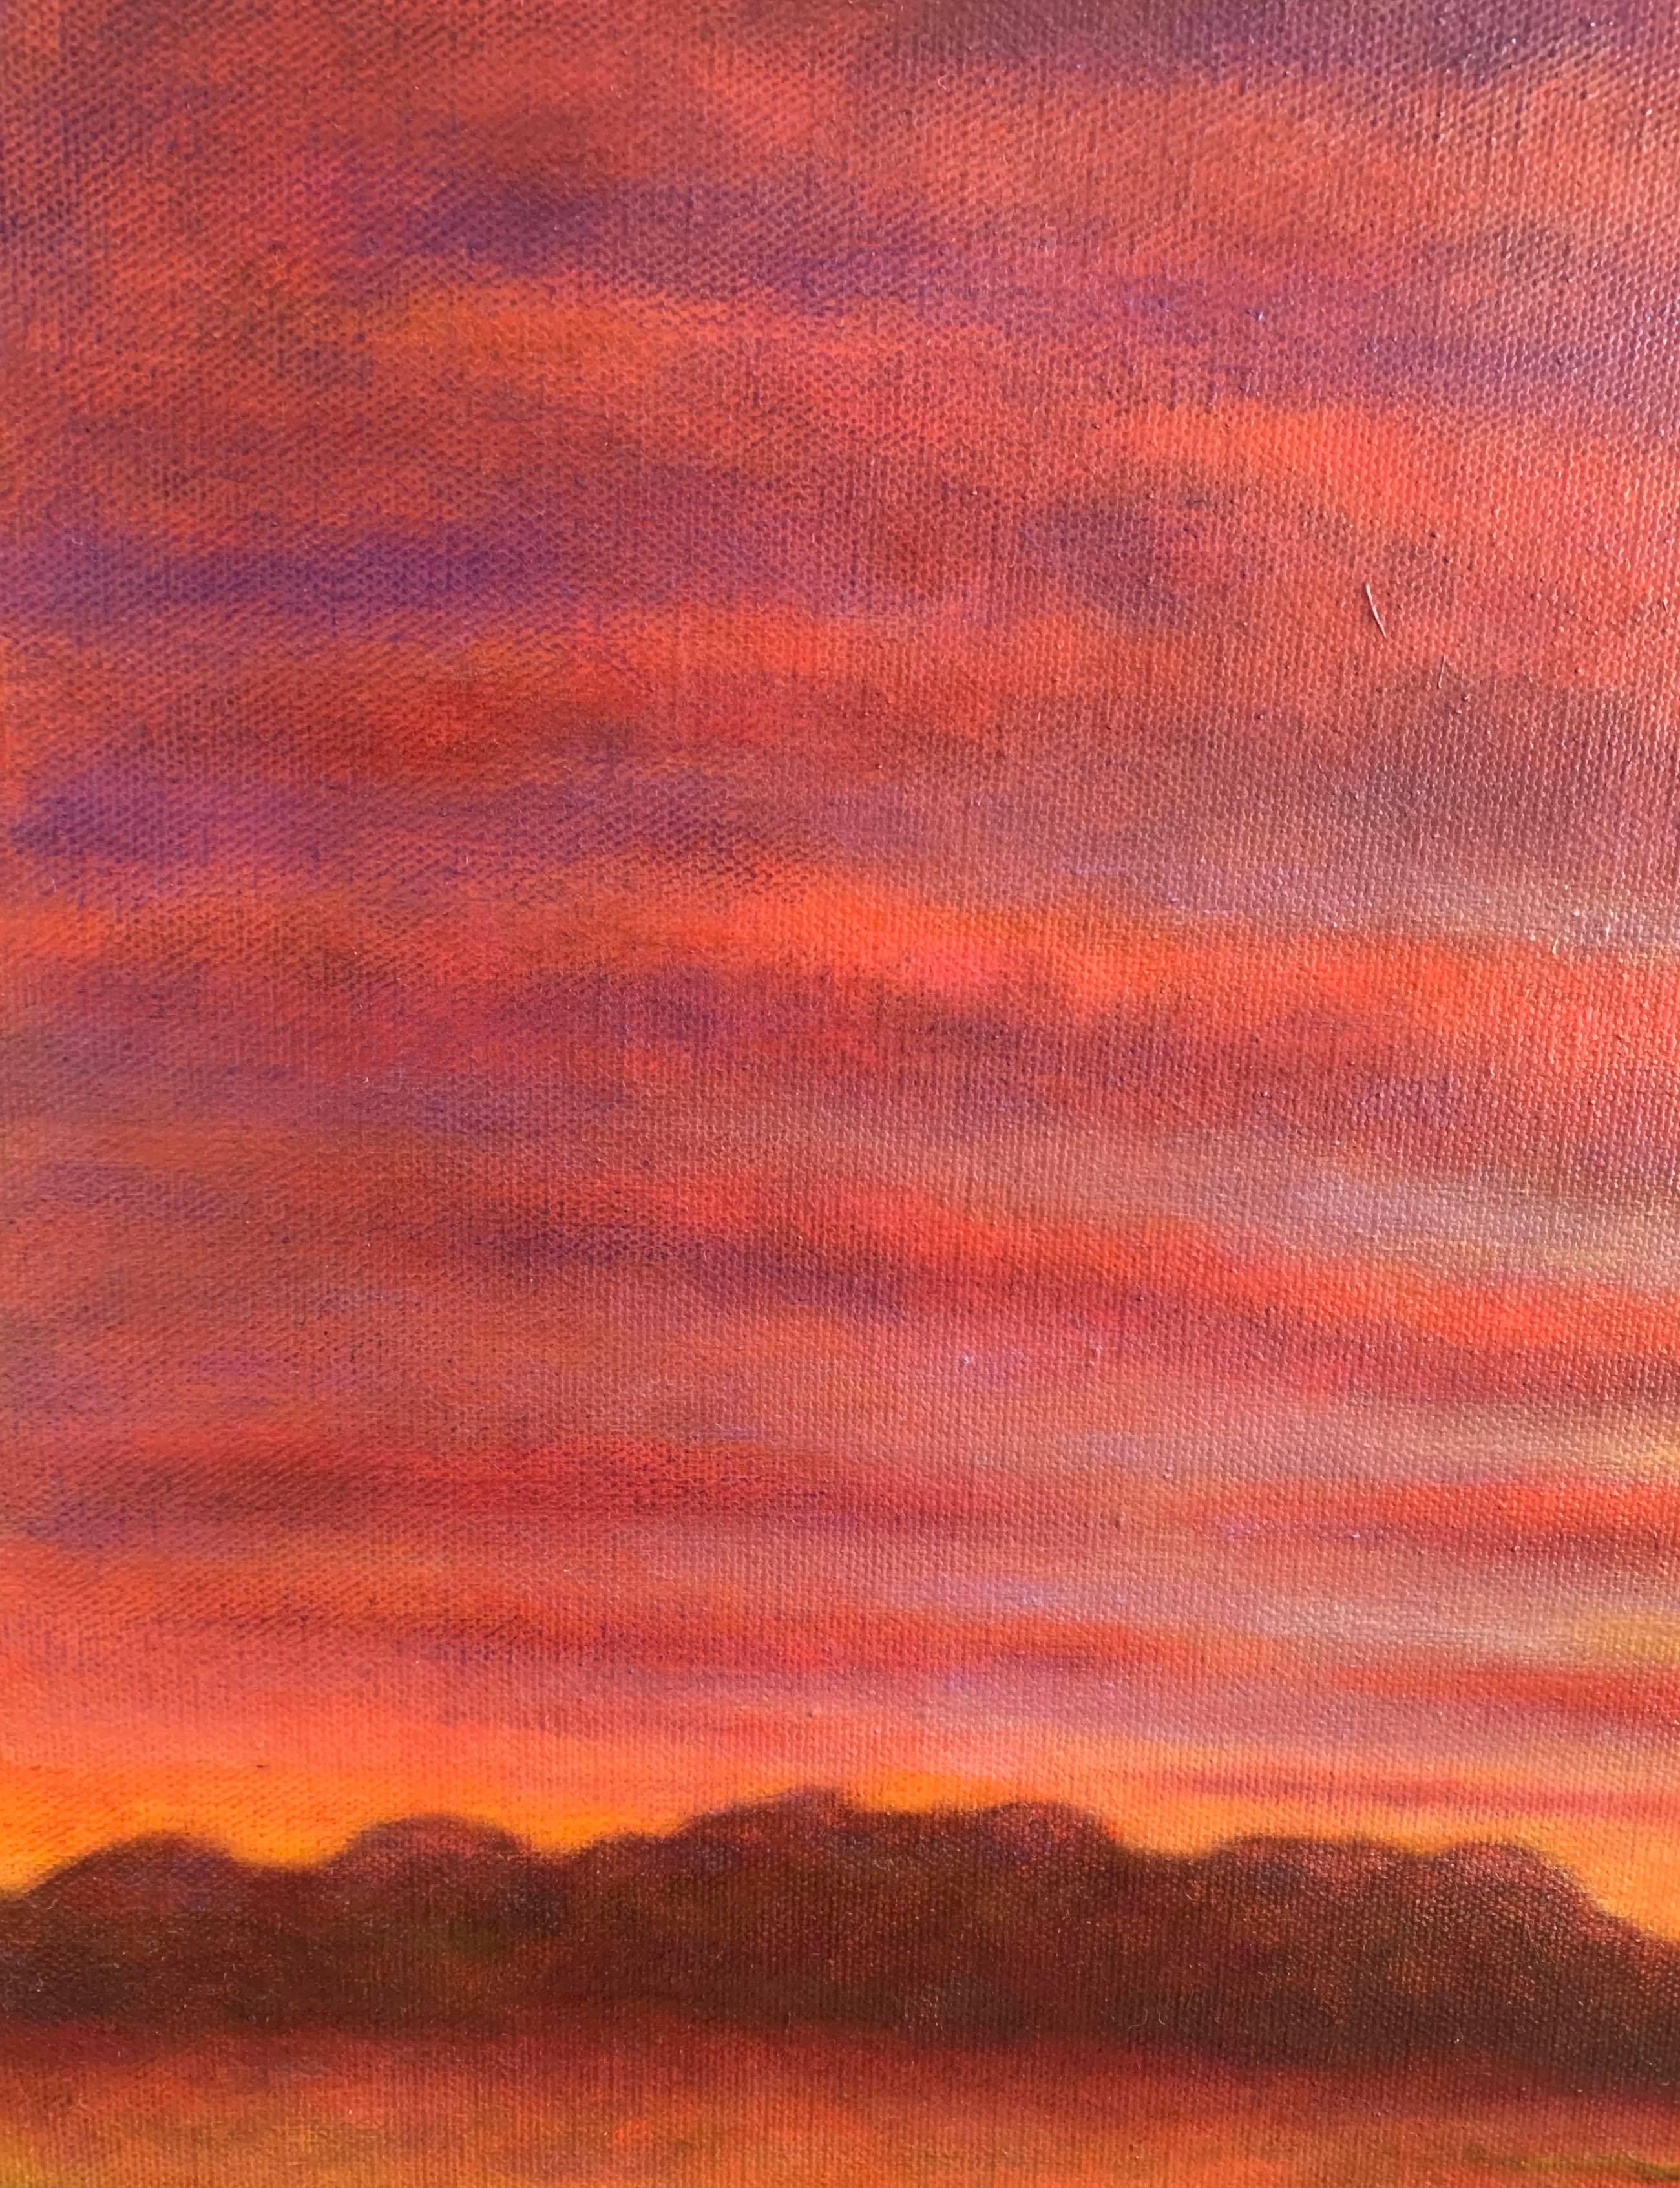 This oil on canvas painting has a striking red-orange landscape. The composition is focused mostly on the sky, giving a peek at the land below, with small blue bodies of water carving it. The expansive and creamy stratus clouds in the sky capture